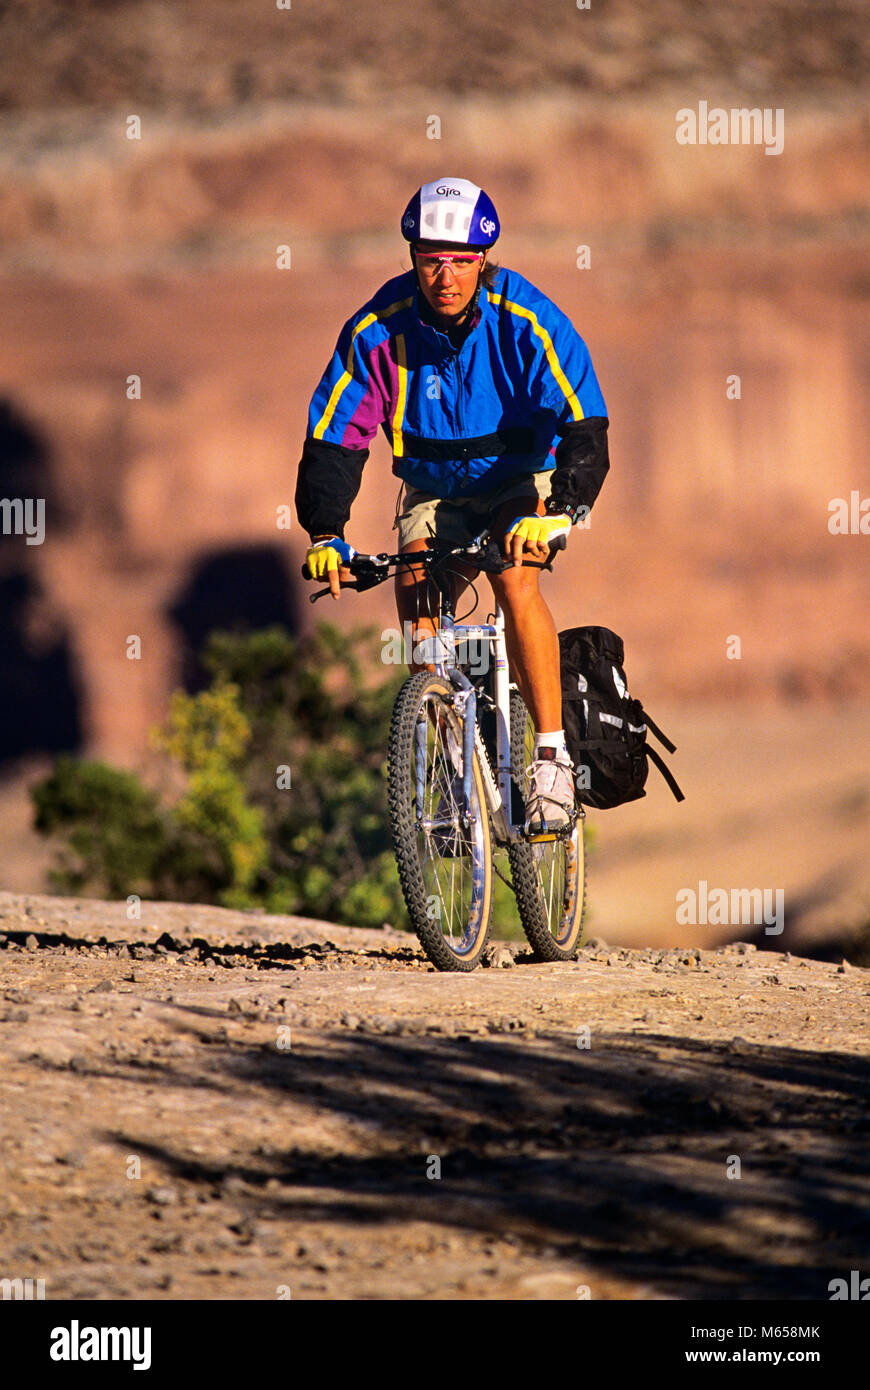 1990s YOUNG MAN RIDING BICYCLE MOAB UTAH USA - kb27705 WAL004 HARS YOUNG ADULT SAFETY RIDE CAUCASIAN ATHLETE CONTROL FIT LIFESTYLE BIKING RURAL TIRE HEALTHINESS ONE PERSON ONLY ATHLETICS NATURE UNITED STATES STRIPE COPY SPACE FULL-LENGTH PHYSICAL FITNESS UNITED STATES OF AMERICA WESTERN ATHLETIC ROUGH PEDAL EYEGLASSES TRANSPORTATION NOSTALGIA TRACTION EYE CONTACT 20-25 YEARS 25-30 YEARS DIRT ENERGY FREEDOM GOALS SINGLE OBJECT ACTIVITY PATH PURPLE PHYSICAL STRENGTHENING BRIGHT WEIGHT LOSS ADVENTURE PROTECTION SELF ESTEEM EFFORT RECREATION ROCKIES 1990s BICYCLING TERRAIN TRAIL MENTAL HEALTH Stock Photo